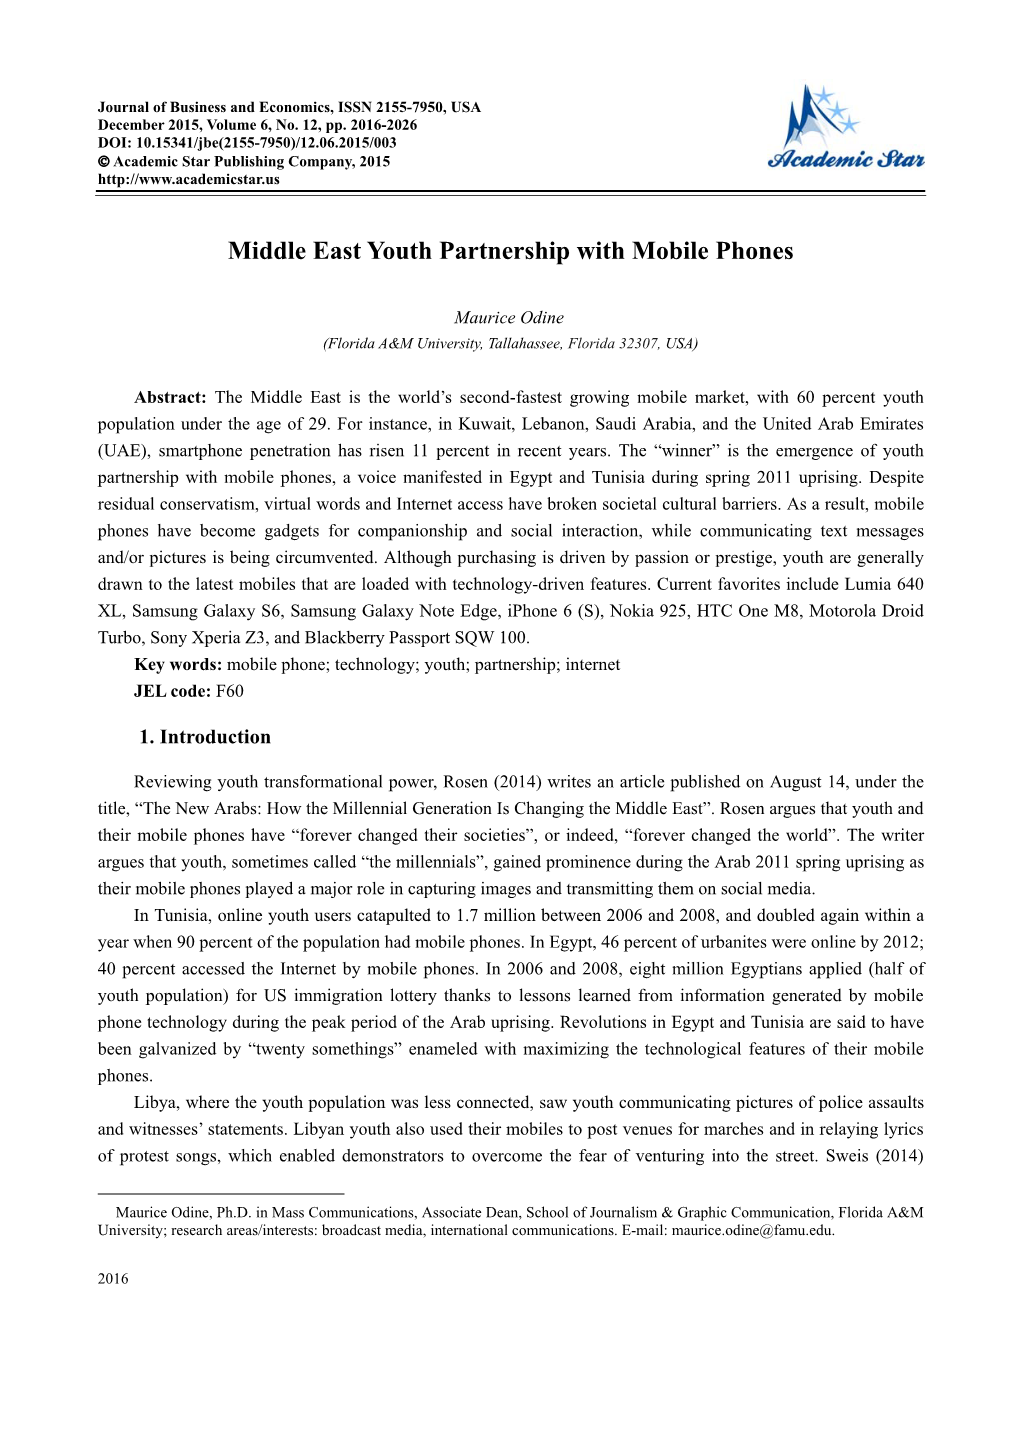 Middle East Youth Partnership with Mobile Phones